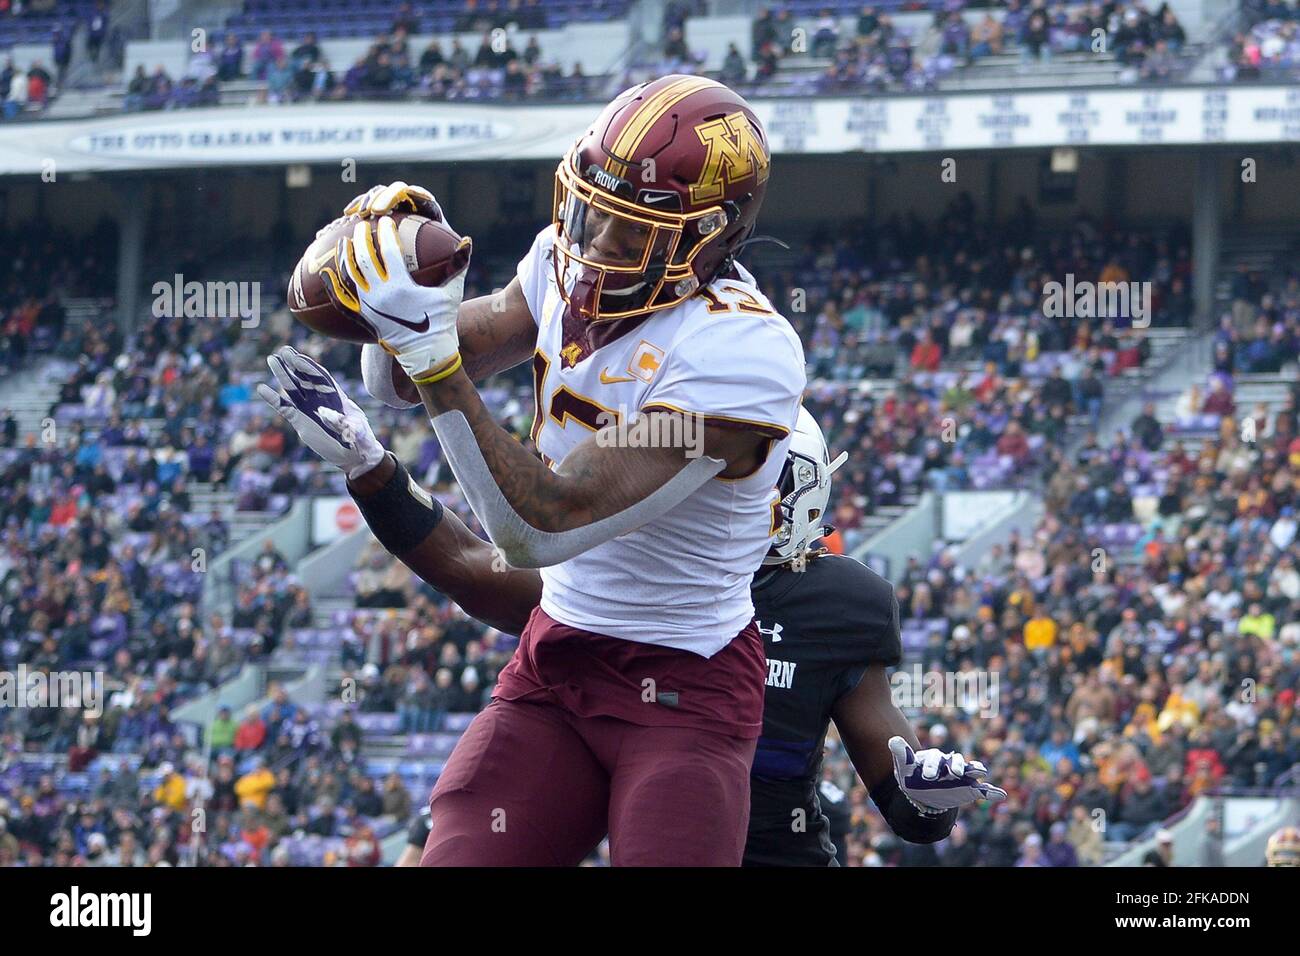 Evanston, USA. 23rd Nov, 2019. Minnesota Gophers wide receiver Rashod Bateman (13) caught his third touchdown reception of the game Saturday in the third quarter against the Northwestern Wildcats. The Minnesota Gophers played the Northwestern Wildcats on Saturday, Nov. 23, 2019 at Ryan Field in Evanston, Ill. With the No. 27 overall pick, the Baltimore Ravens selected Bateman in the NFL Draft. (Photo by Aaron Lavinsky/Minneapolis Star Tribune/TNS/Sipa USA) Credit: Sipa USA/Alamy Live News Stock Photo